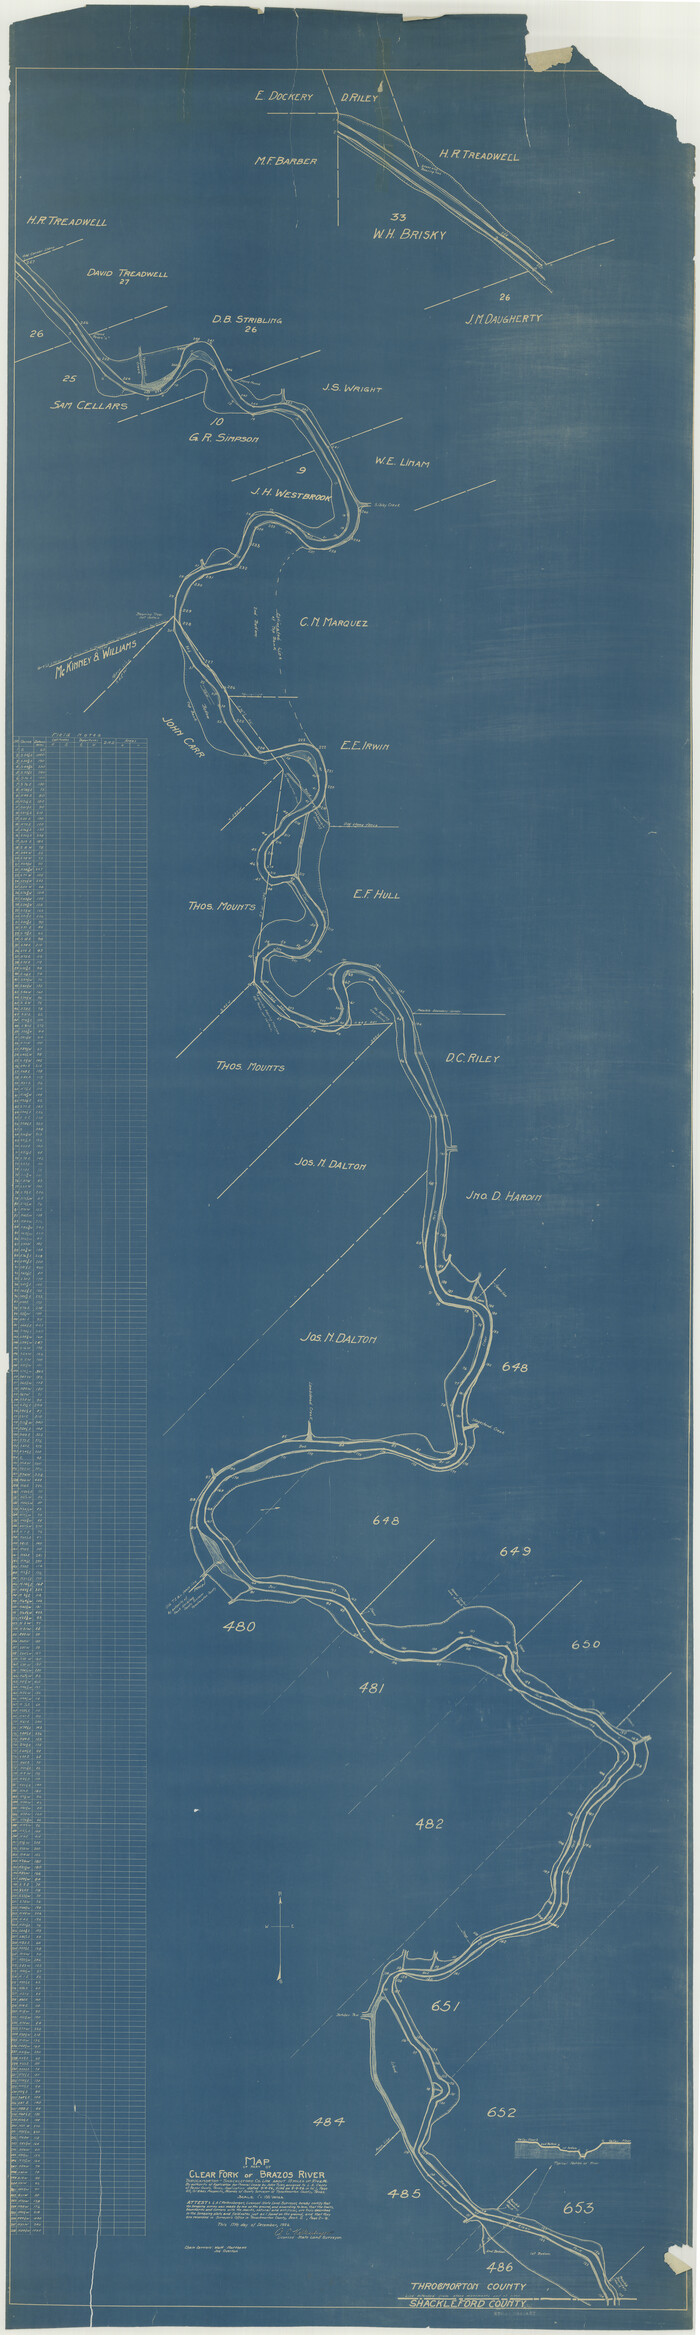 65571, [Sketch for Mineral Application 16341 - Clear Fork of Brazos River, Taylor & Holcomb], General Map Collection